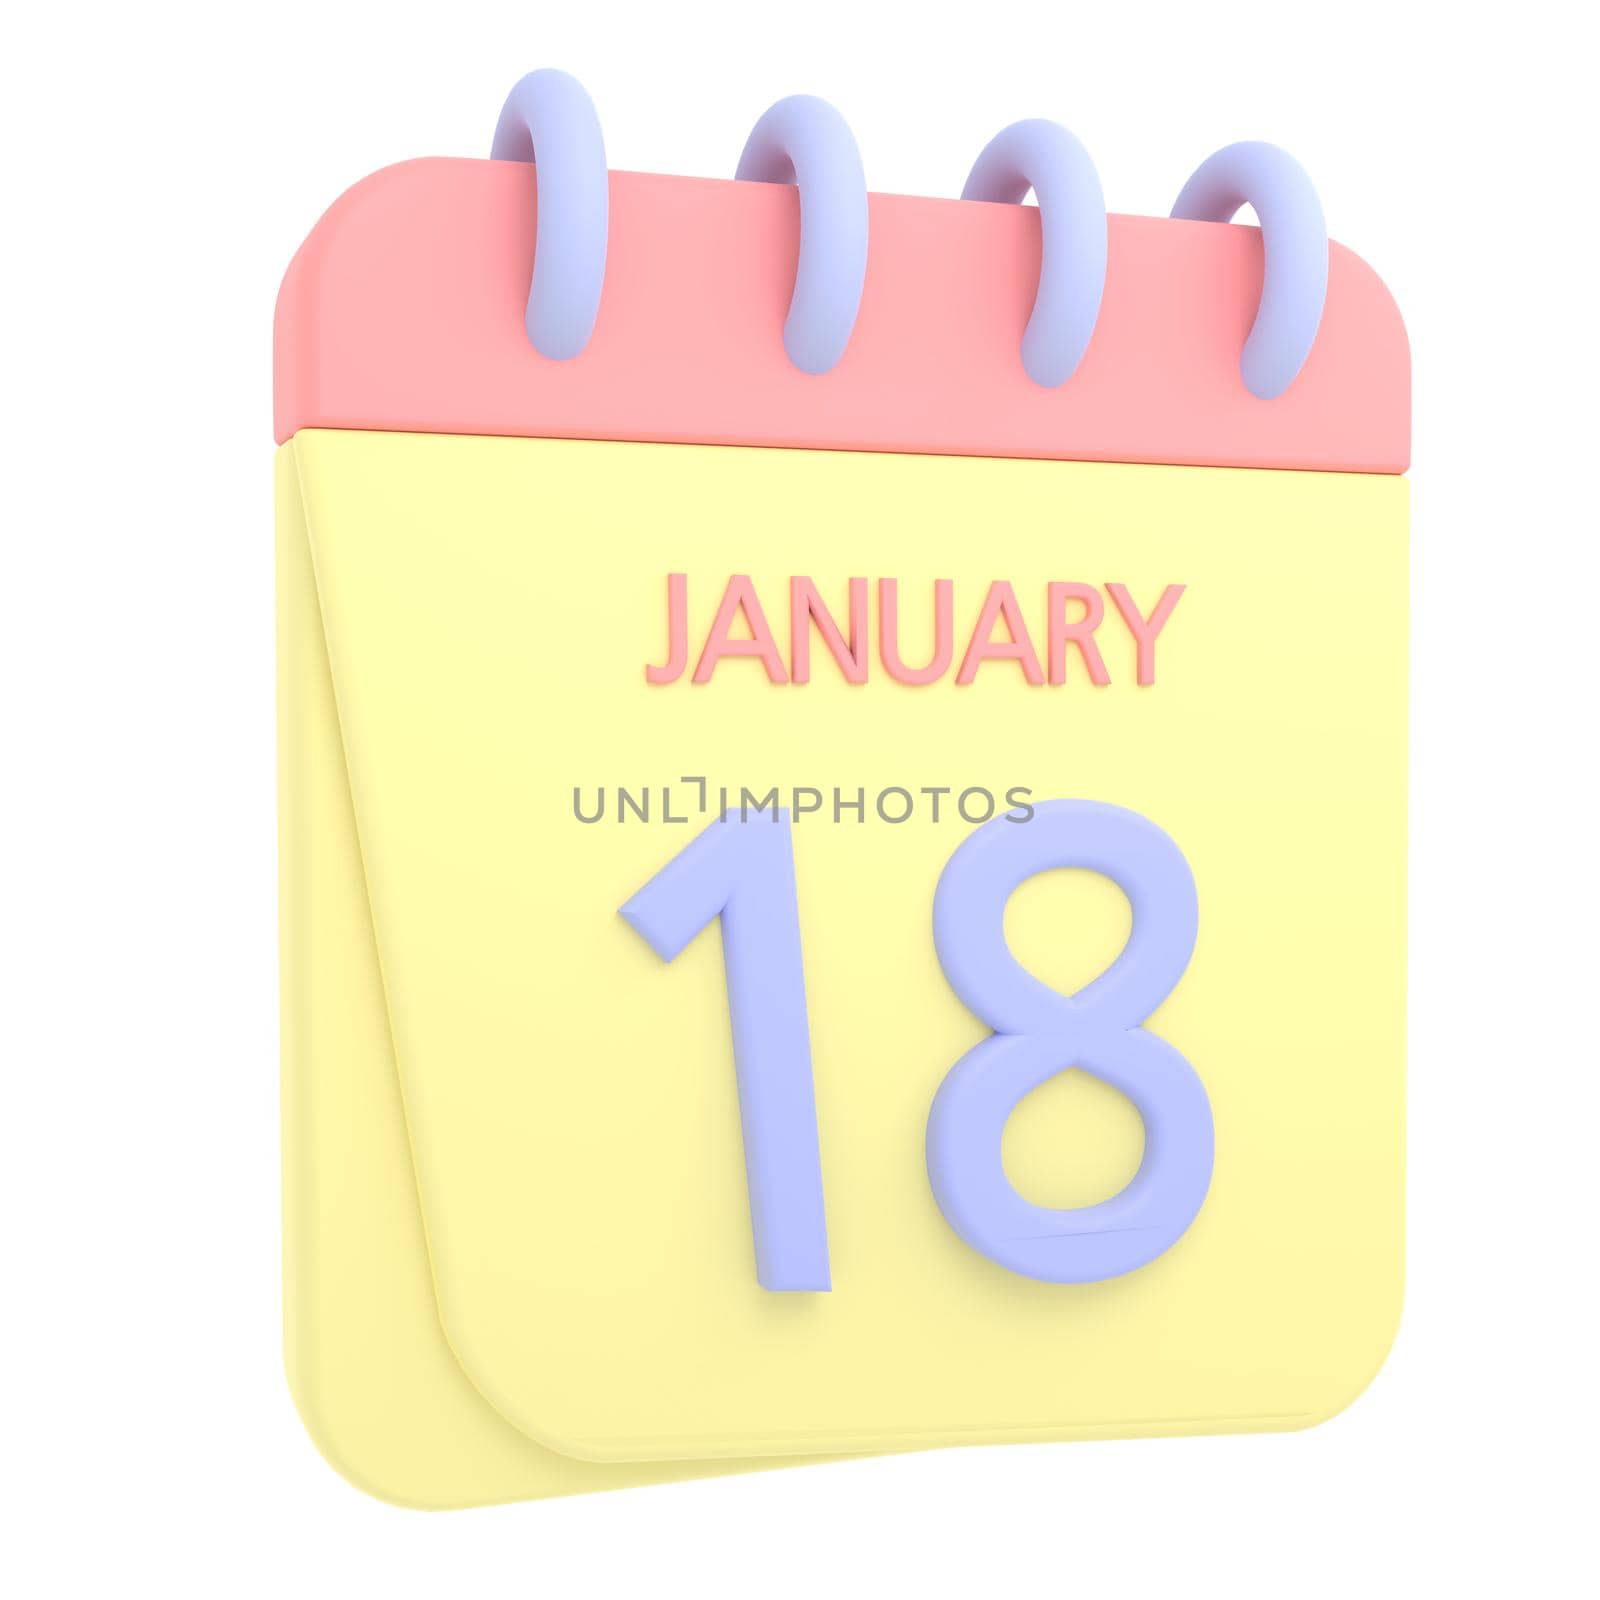 18th January 3D calendar icon. Web style. High resolution image. White background